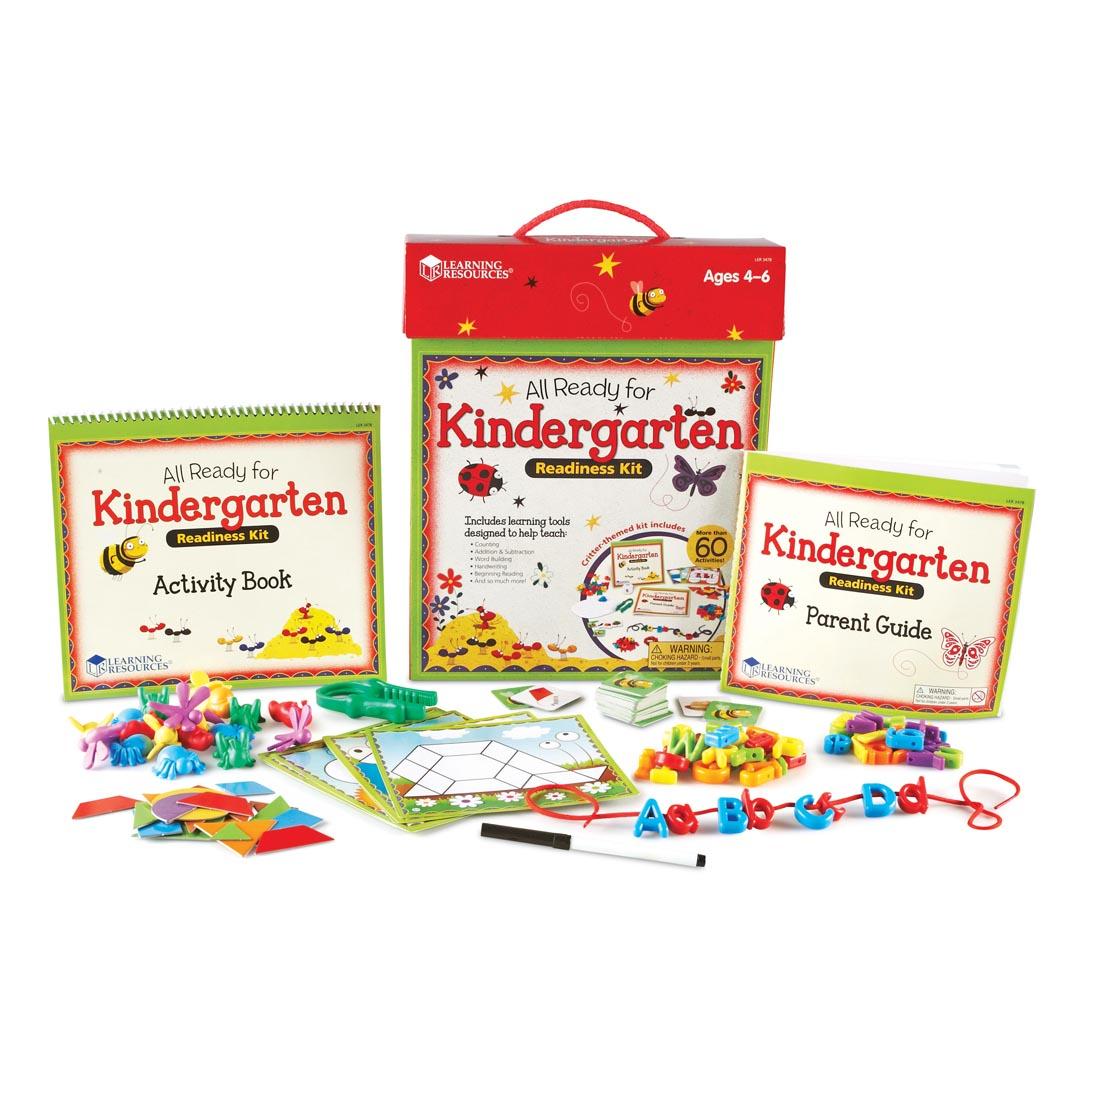 plastic bug counters, lacing alphabet beads and more parts of the Kindergarten Readiness Kit